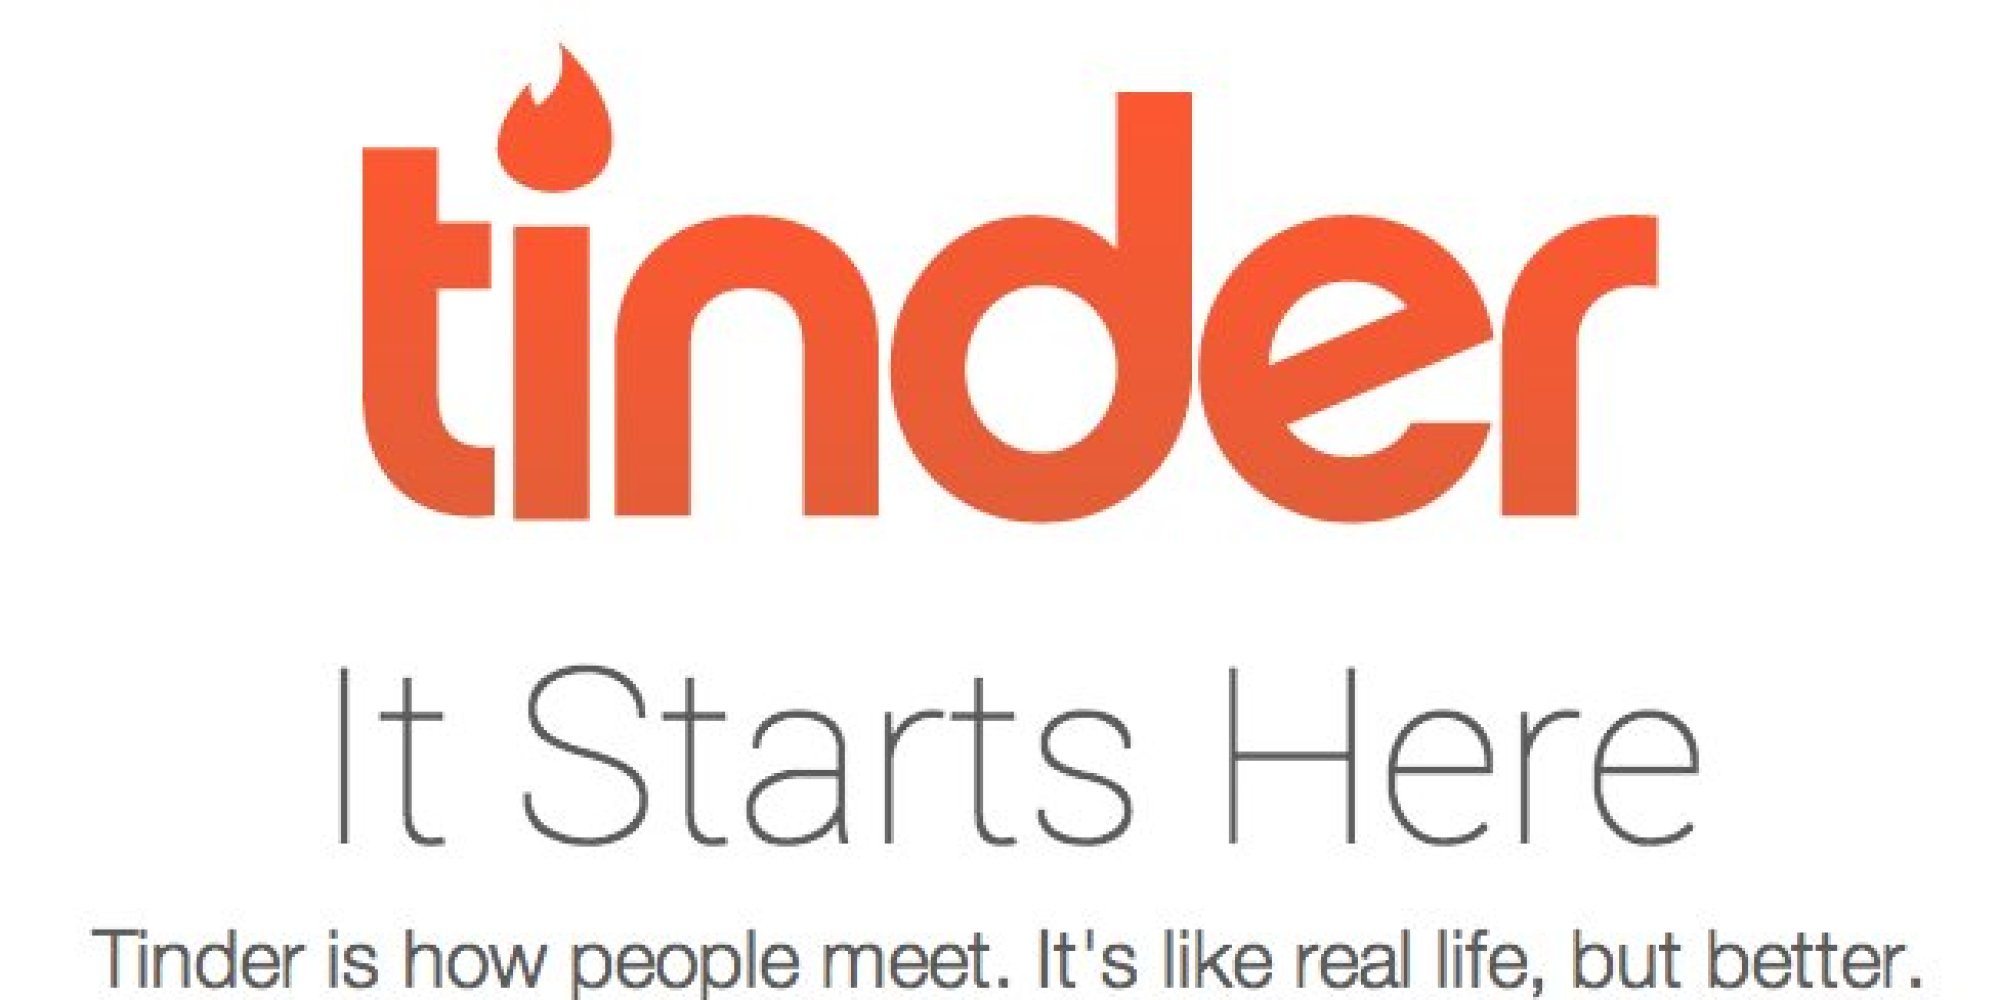 Tinder - One of the best hookup apps